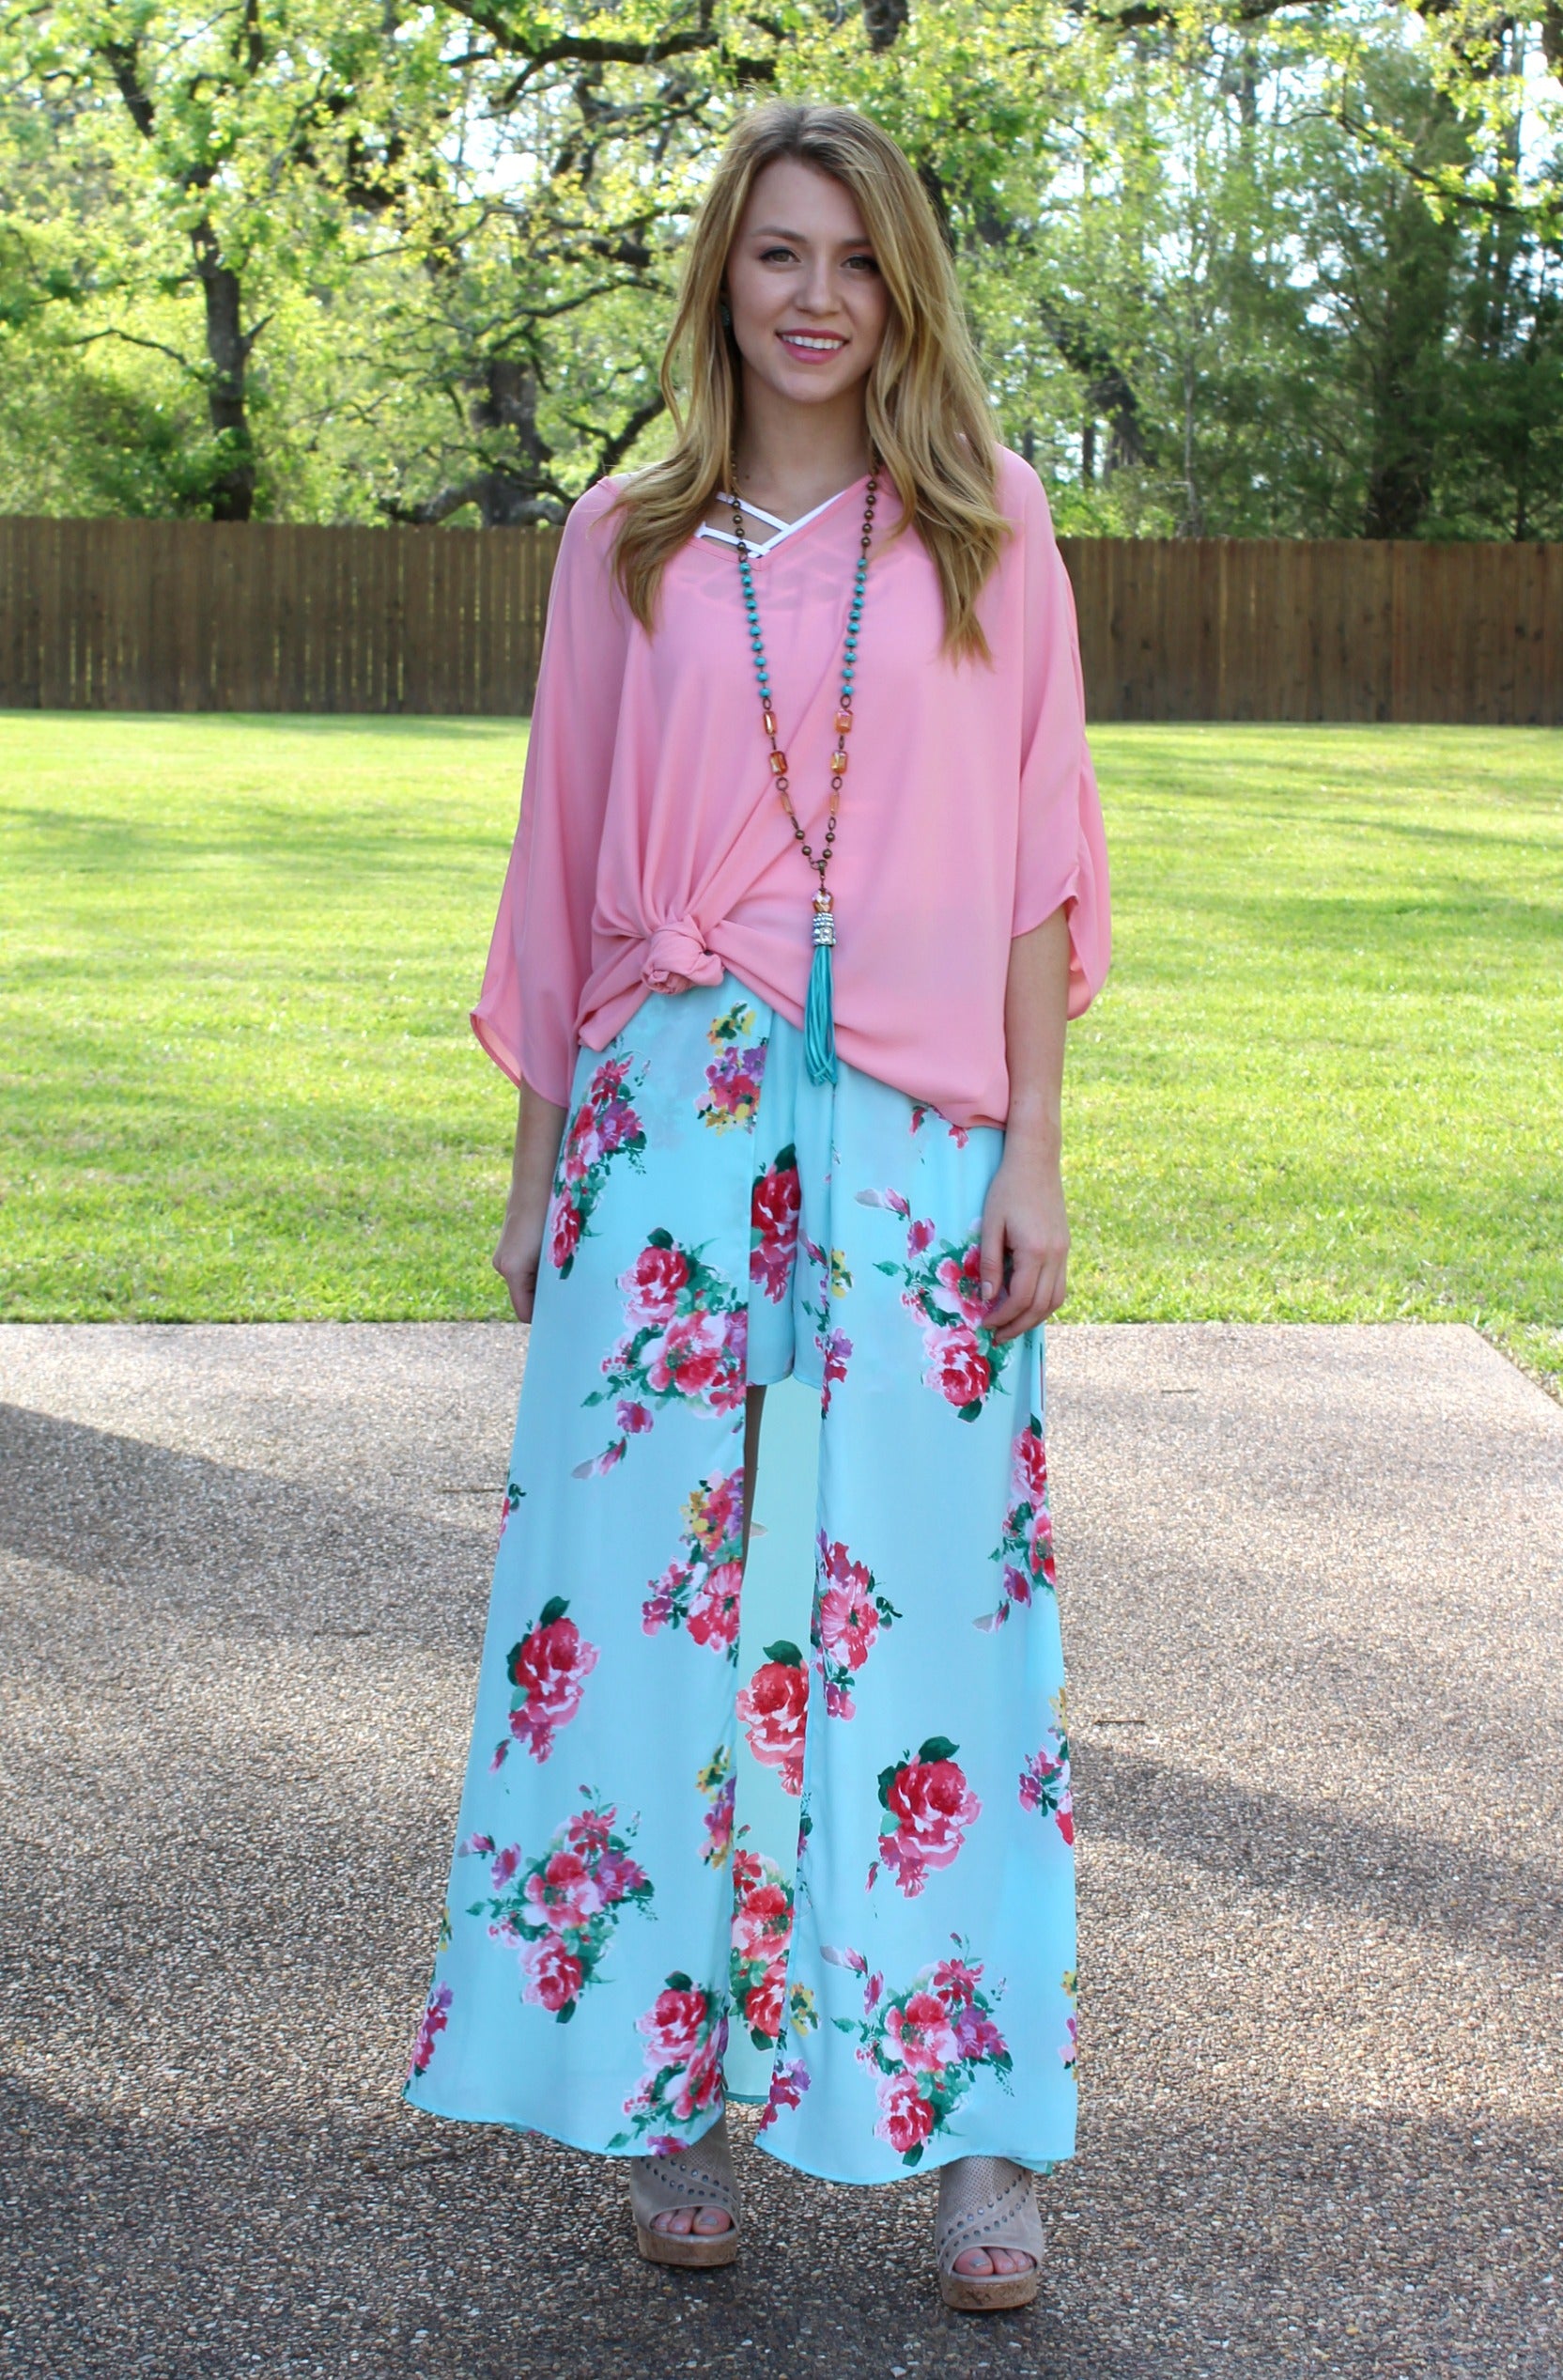 One in a Million Maxi Skort in Turquoise Floral - Giddy Up Glamour Boutique